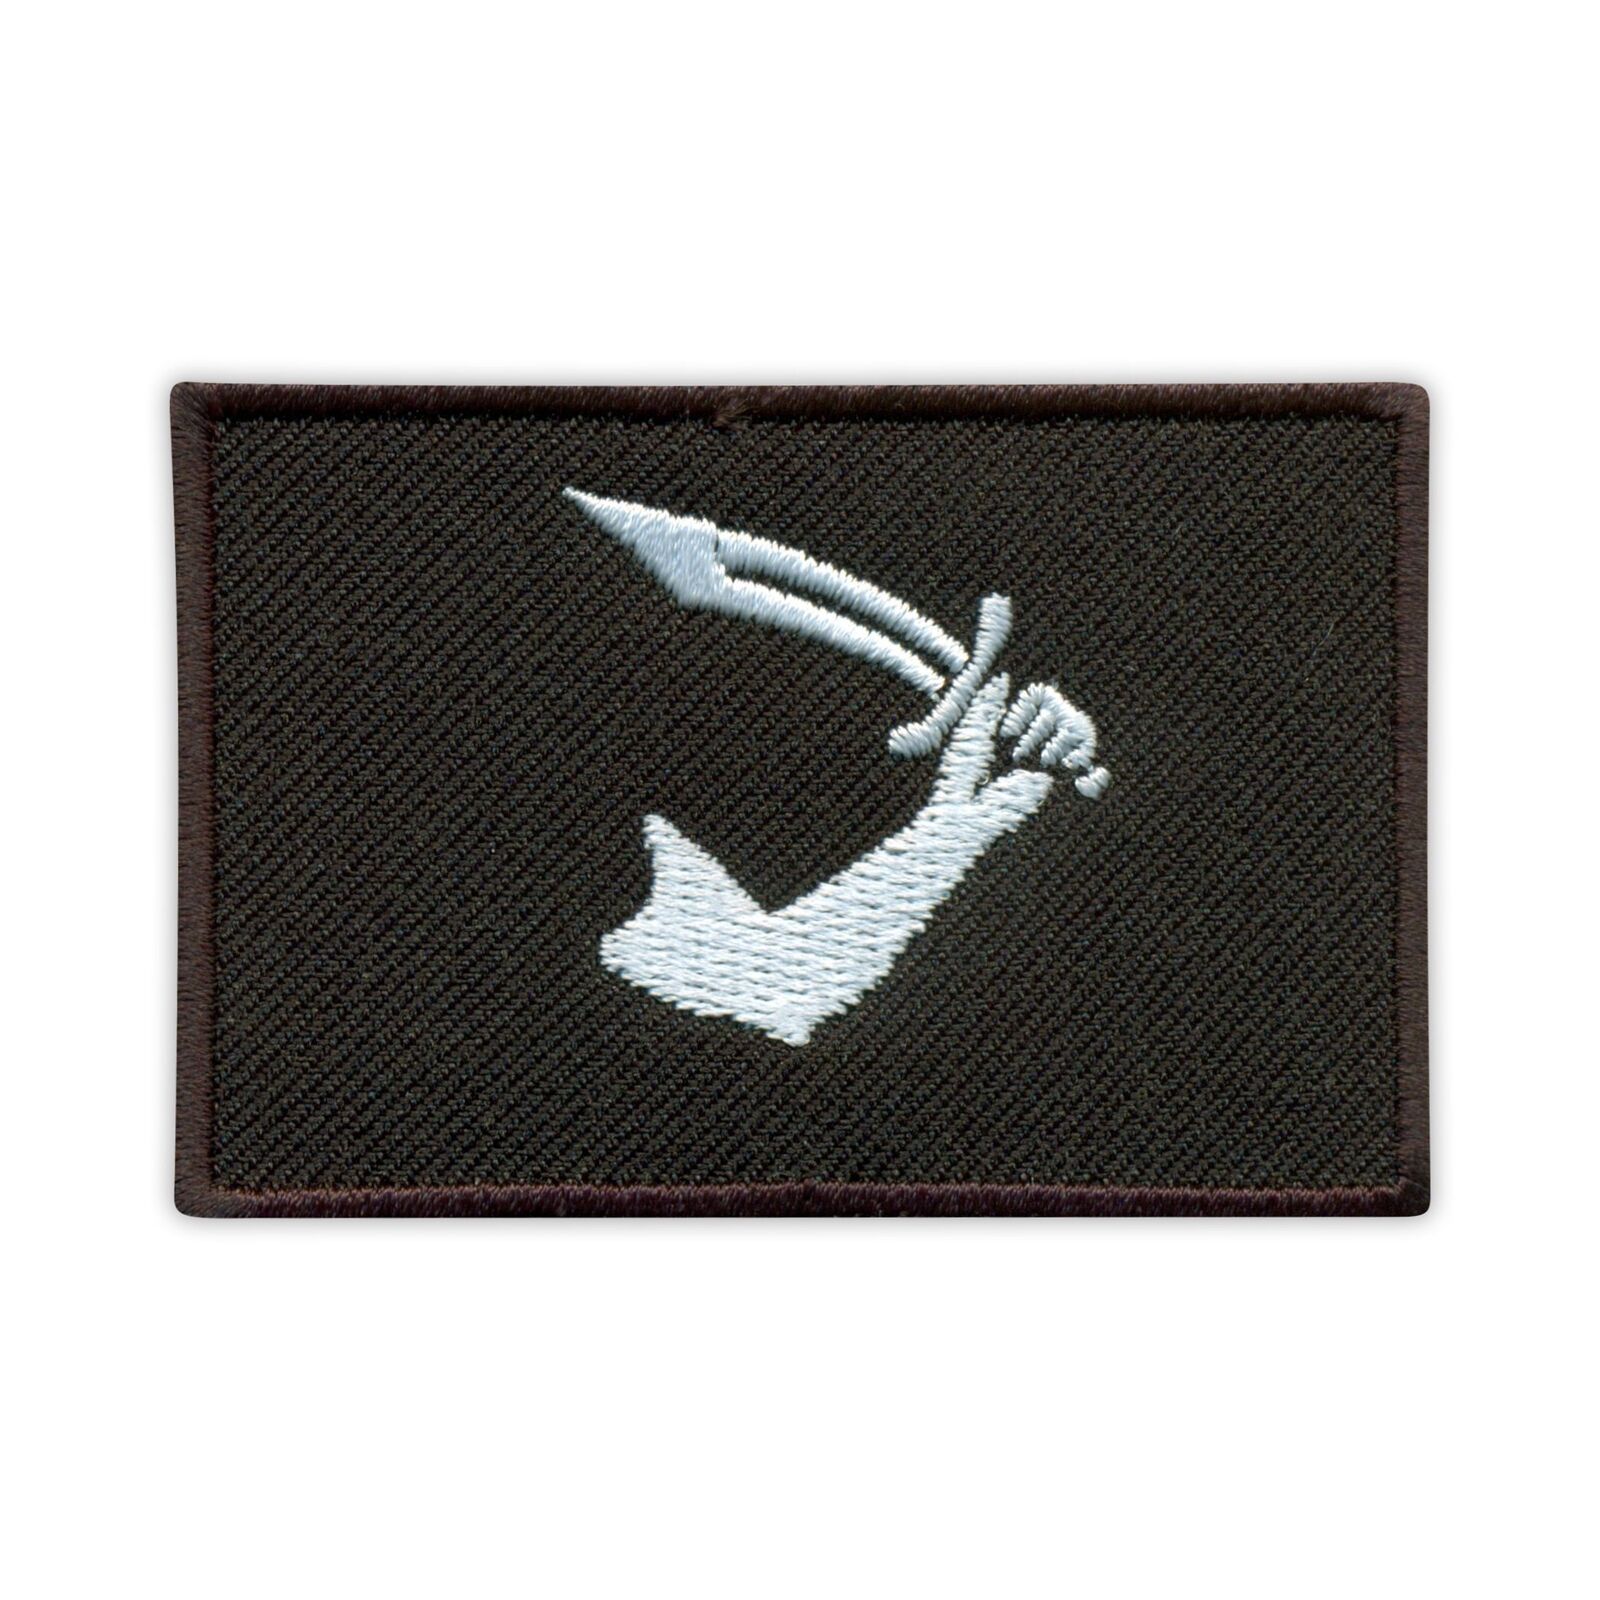 Flag of Pirates - Thomas Tew Patch/Badge Embroidered